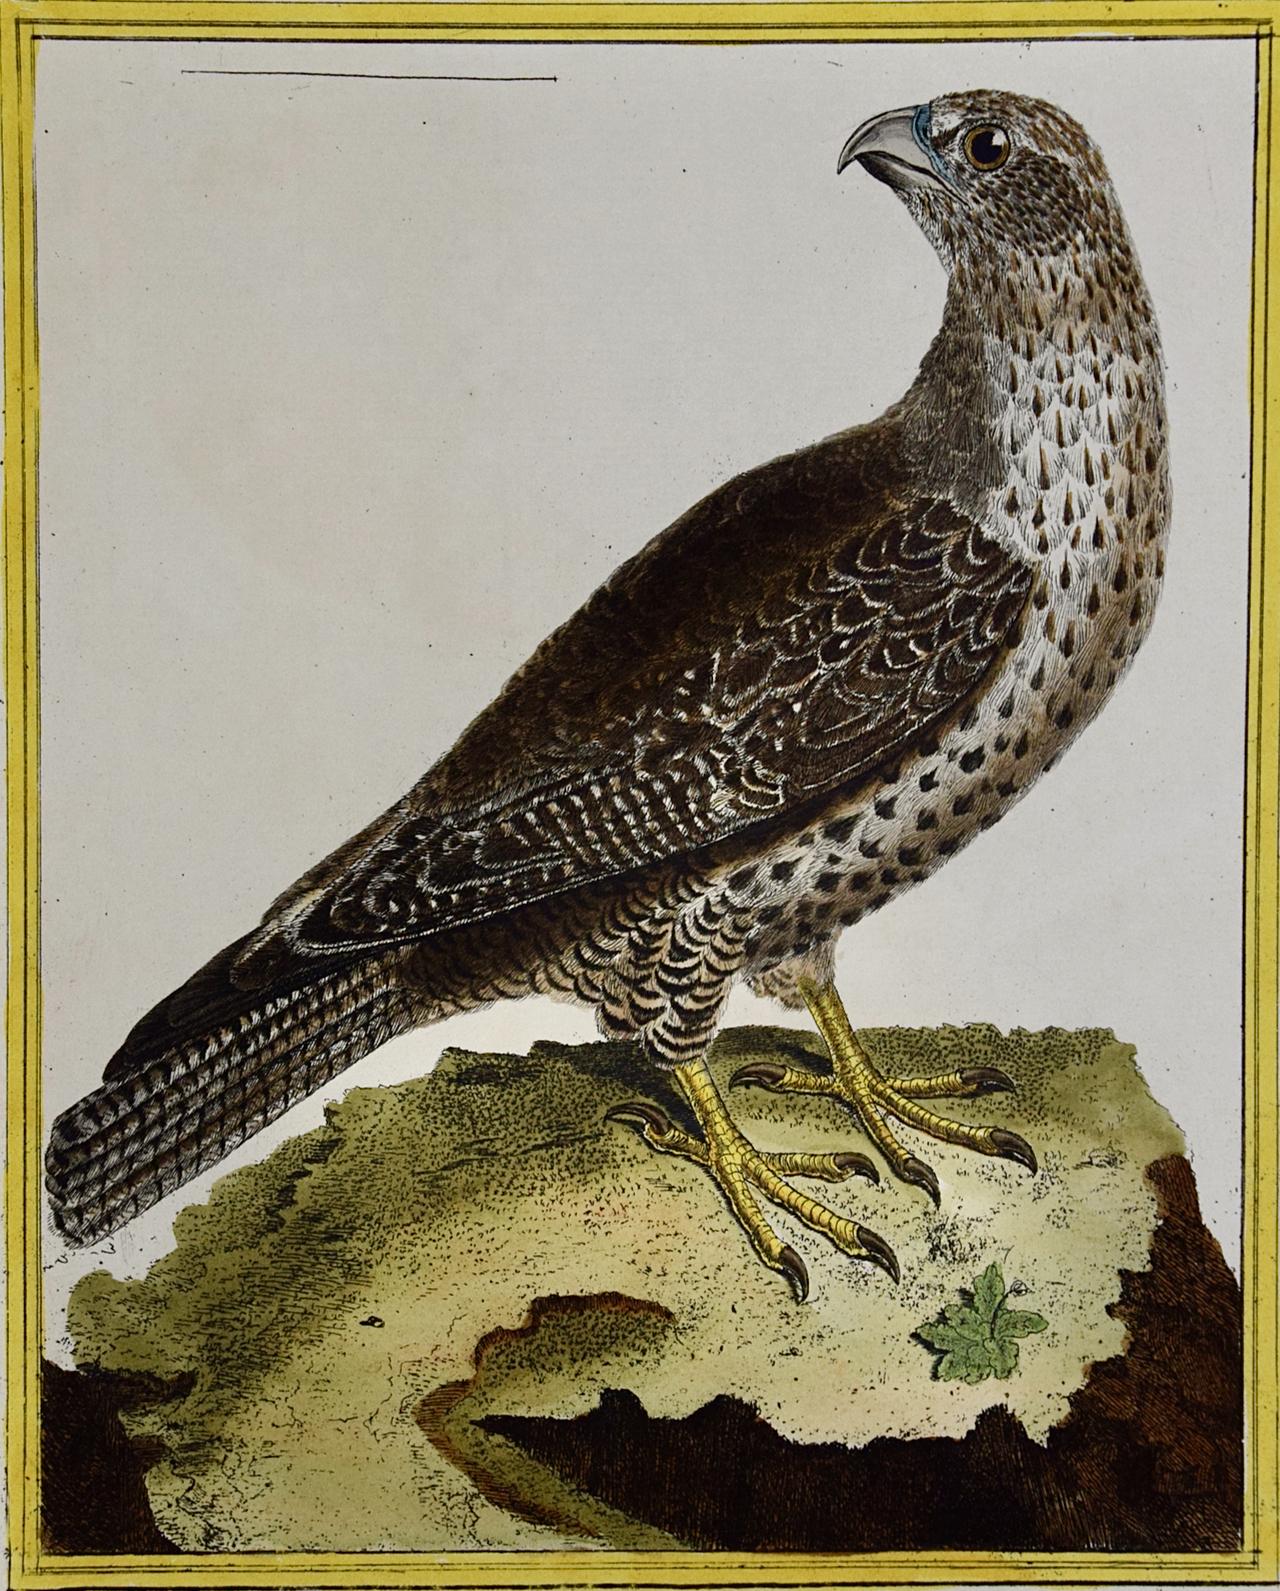 An Icelandic GyrFalcon: An 18th Century Hand-colored Engraving by Martinet - Print by Francois Nicolas Martinet